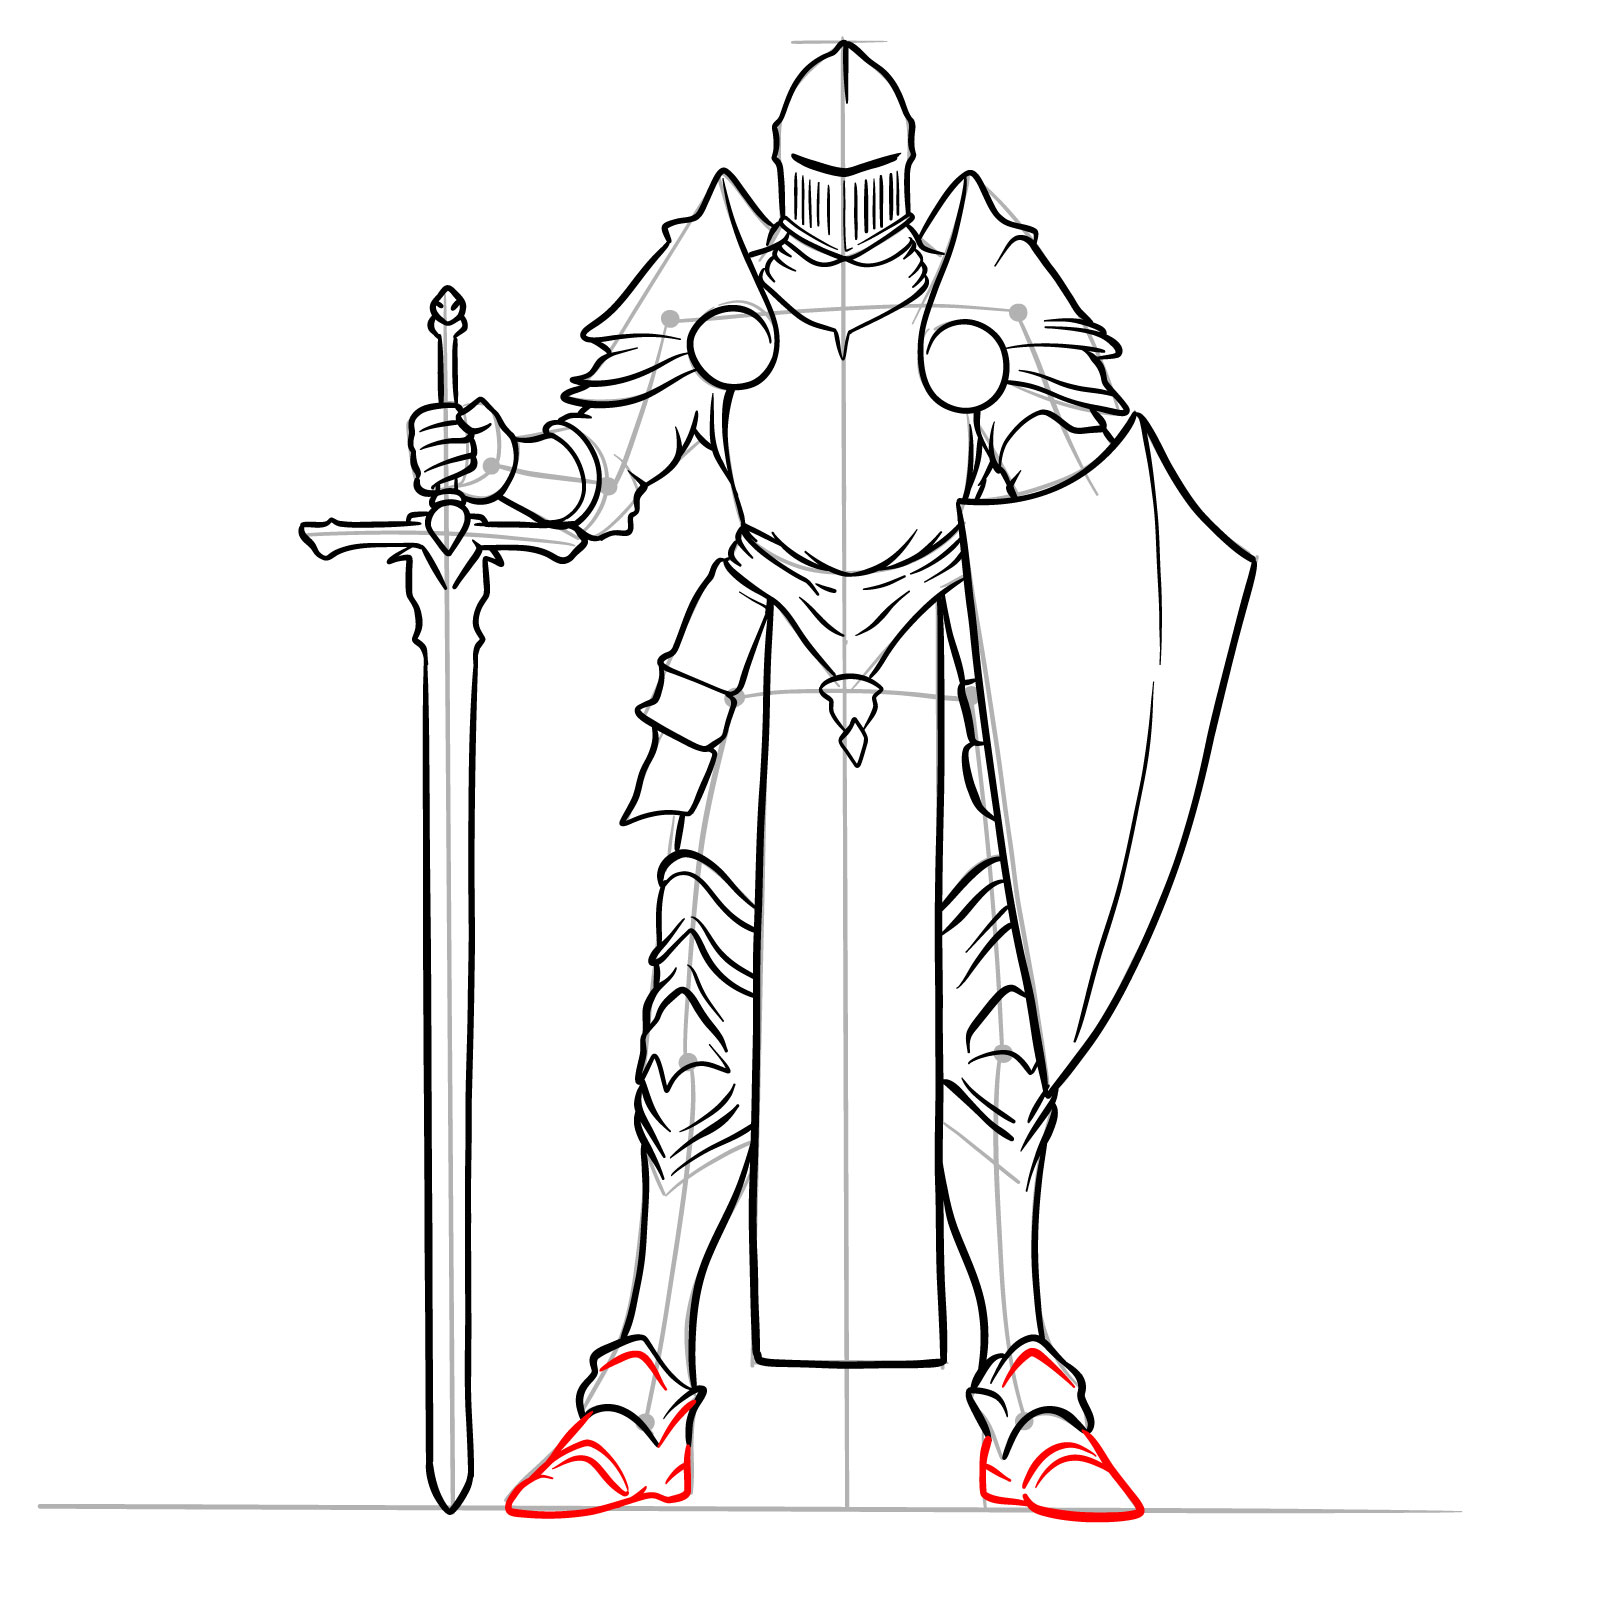 Male paladin drawing step 19: foot armor